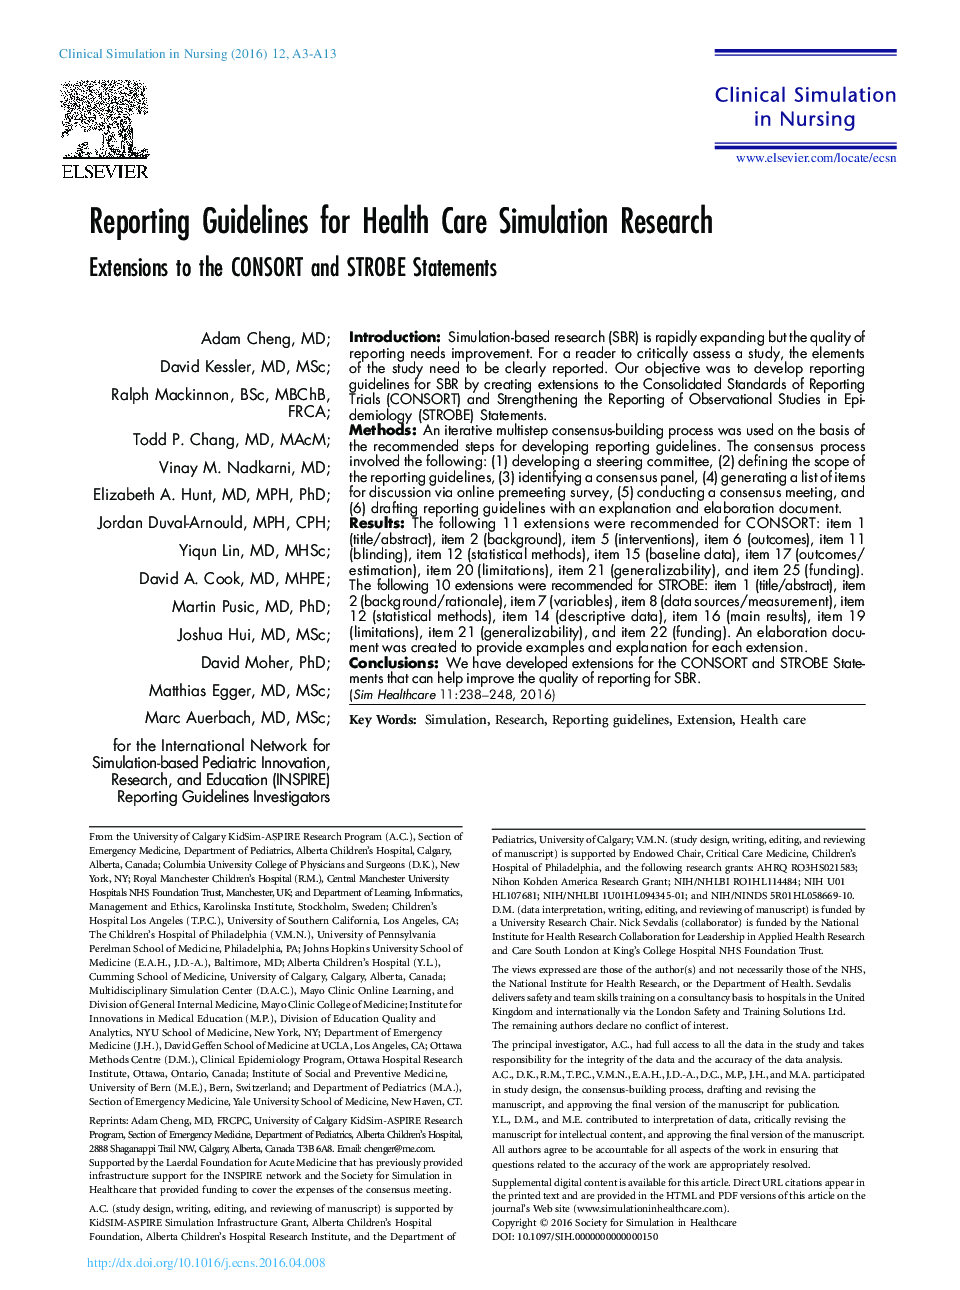 Reporting Guidelines for Health Care Simulation Research